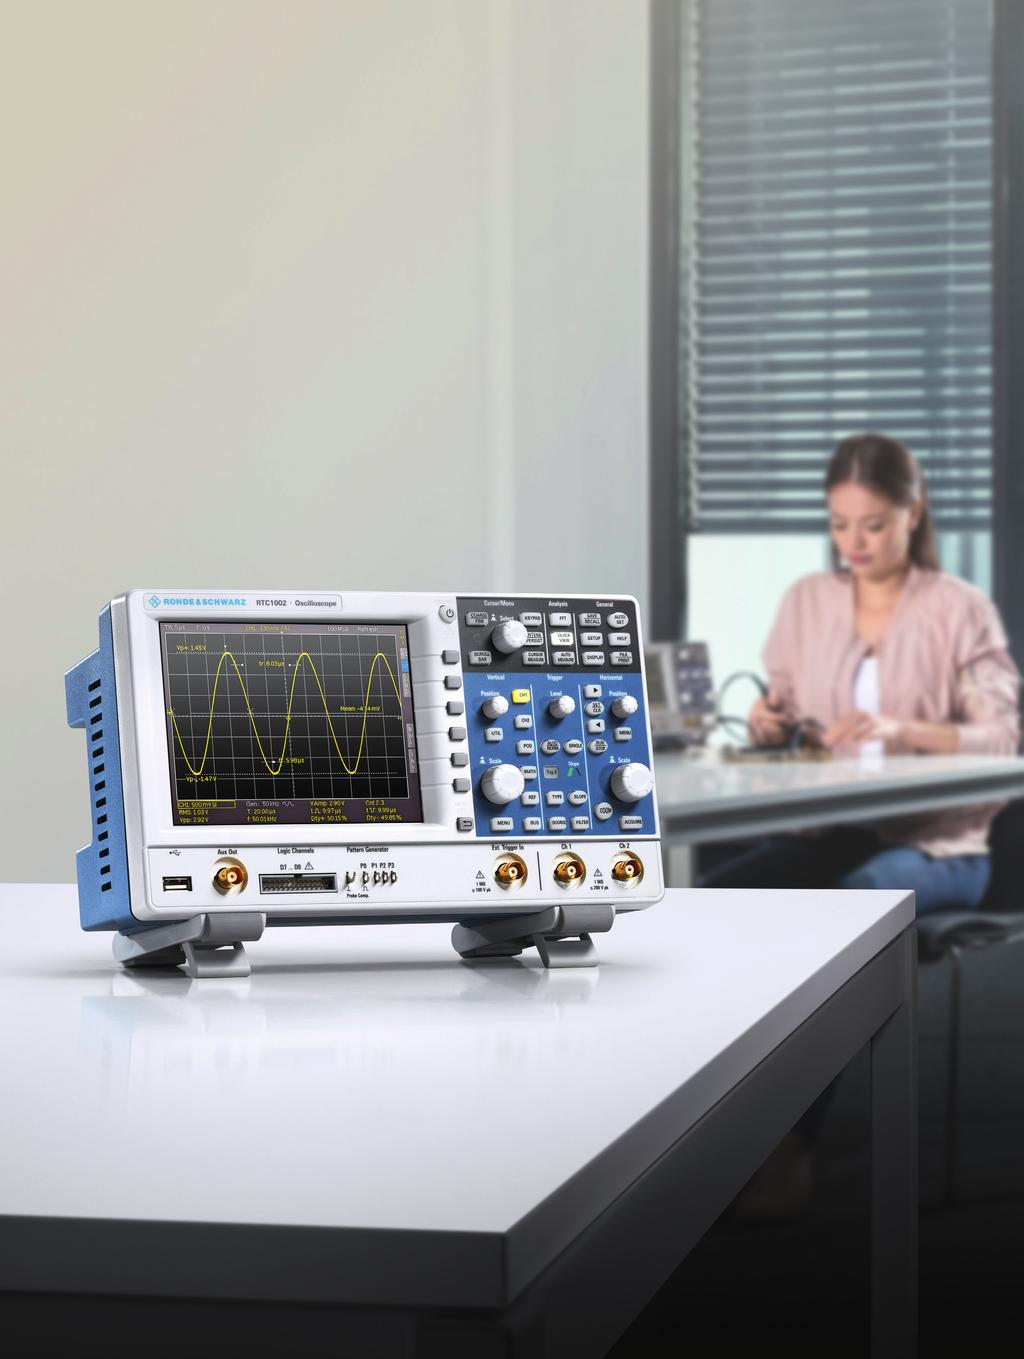 R&S RTC1000 Oscilloscope Great value 50 MHz to 300 MHz Two channels Product